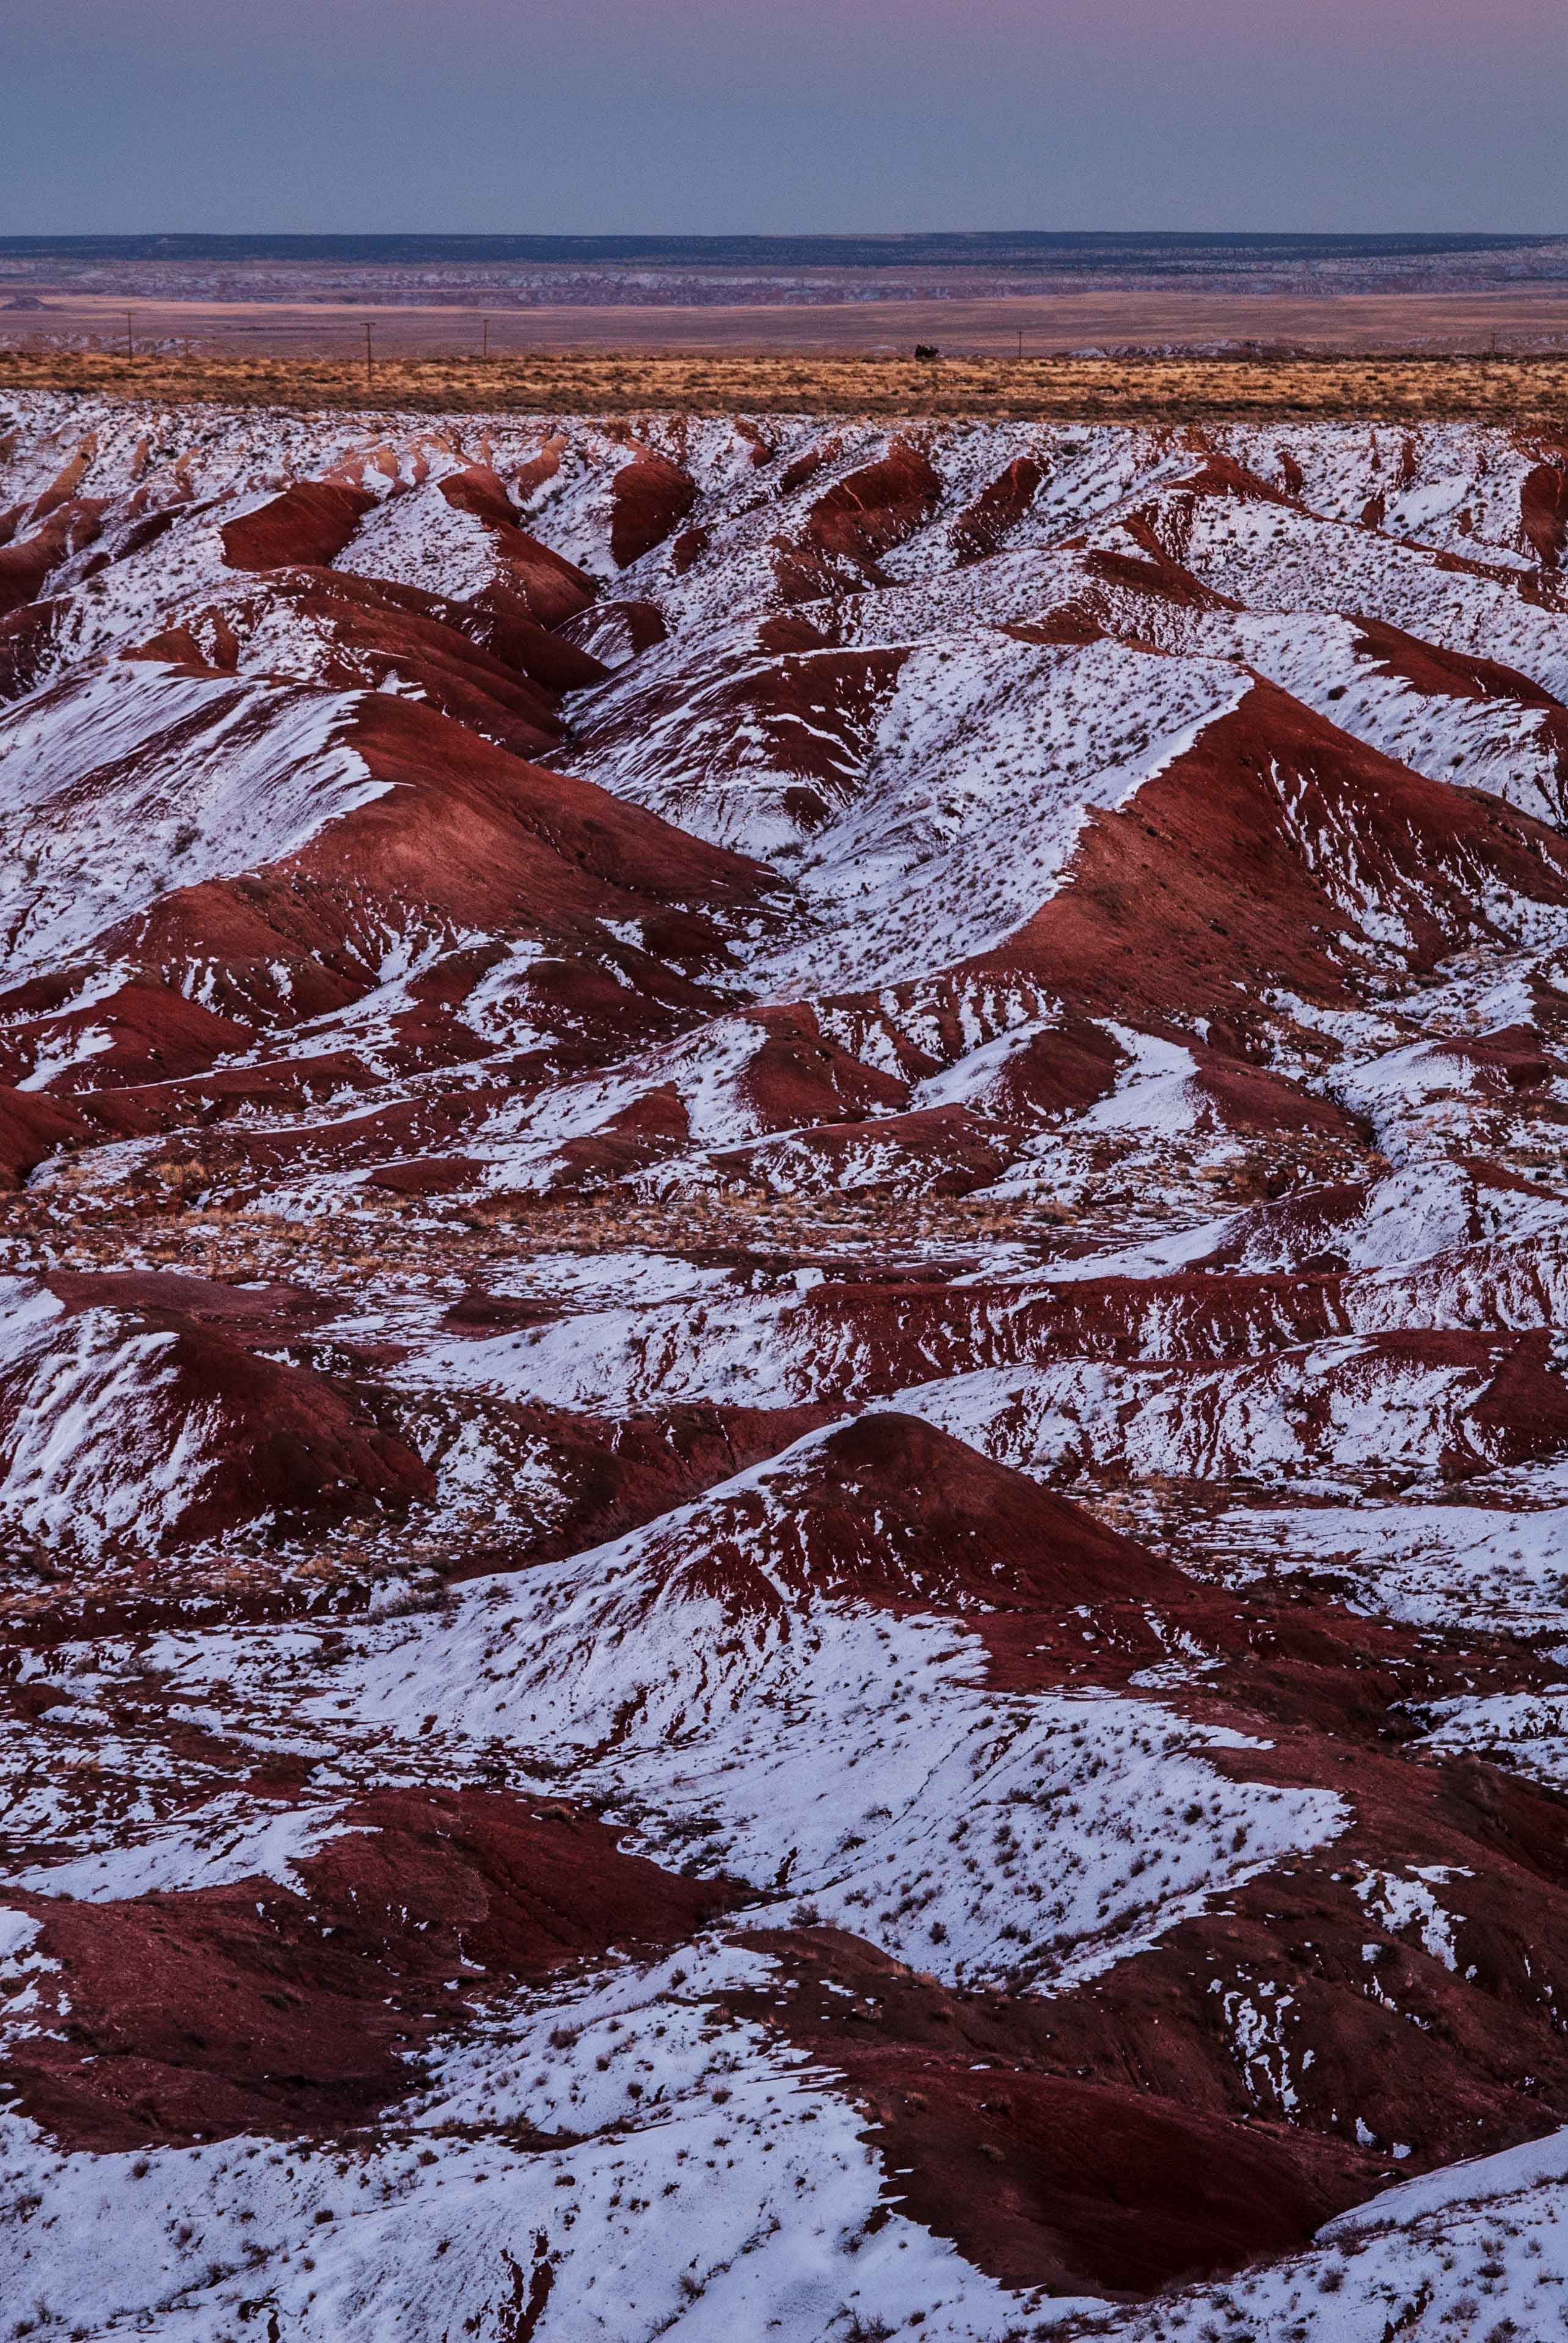 Part of the Painted Desert at Petrified Forest National Park, Arizona